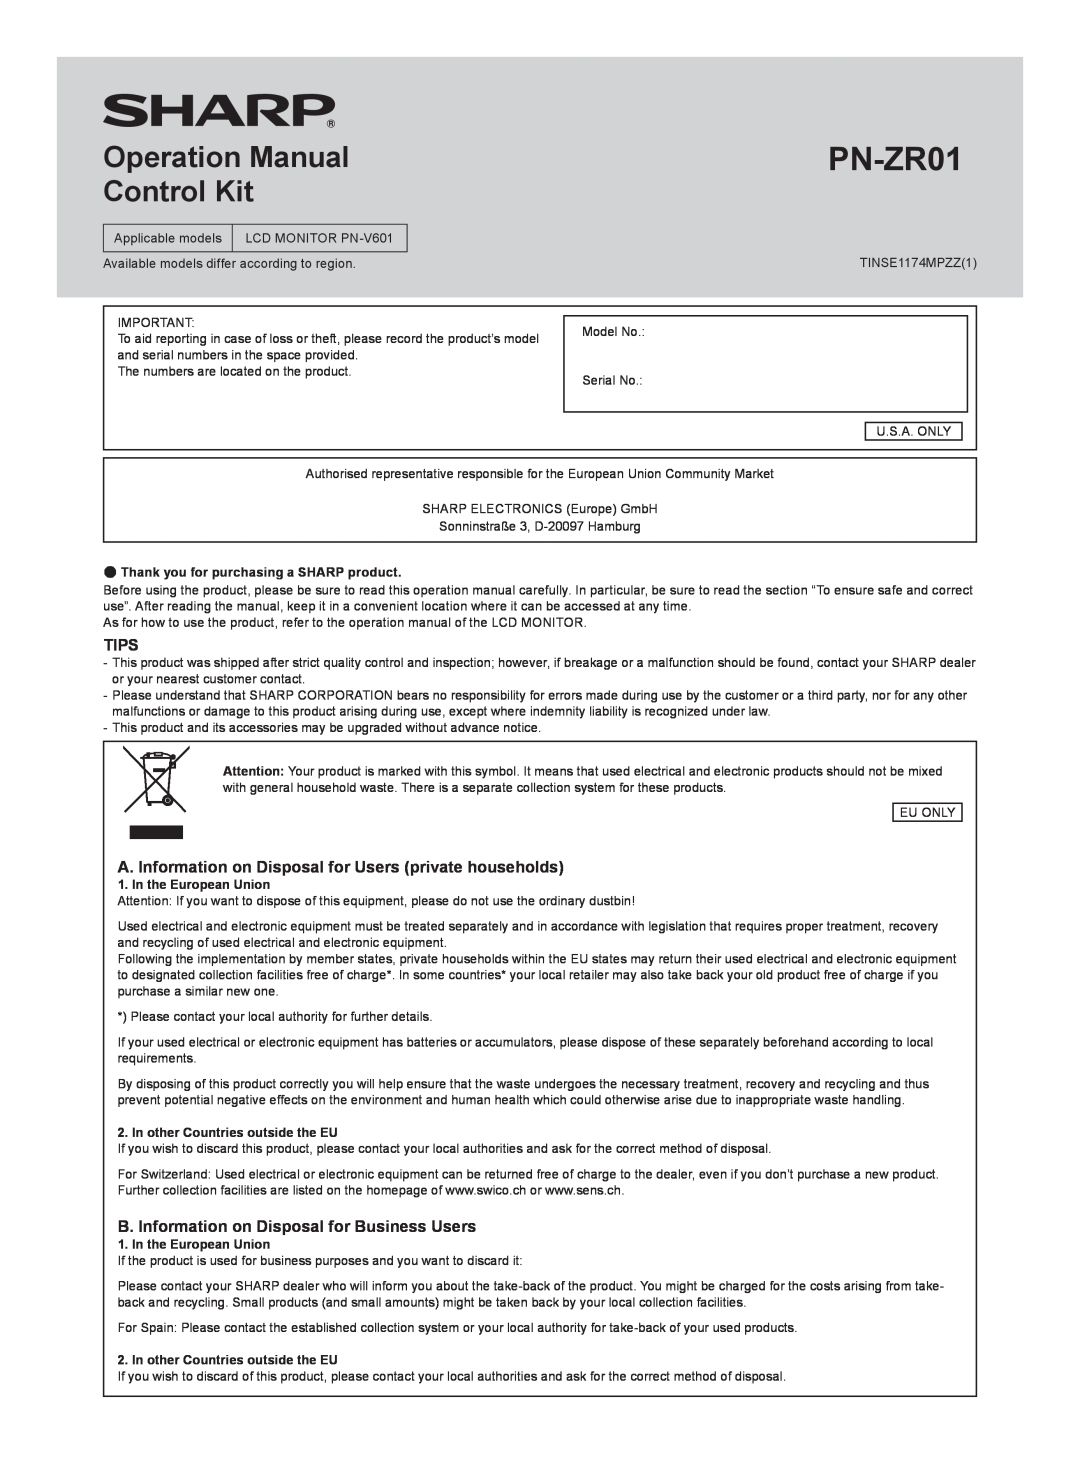 Sharp PN-ZR01 operation manual Control Kit, Tips, B. Information on Disposal for Business Users 